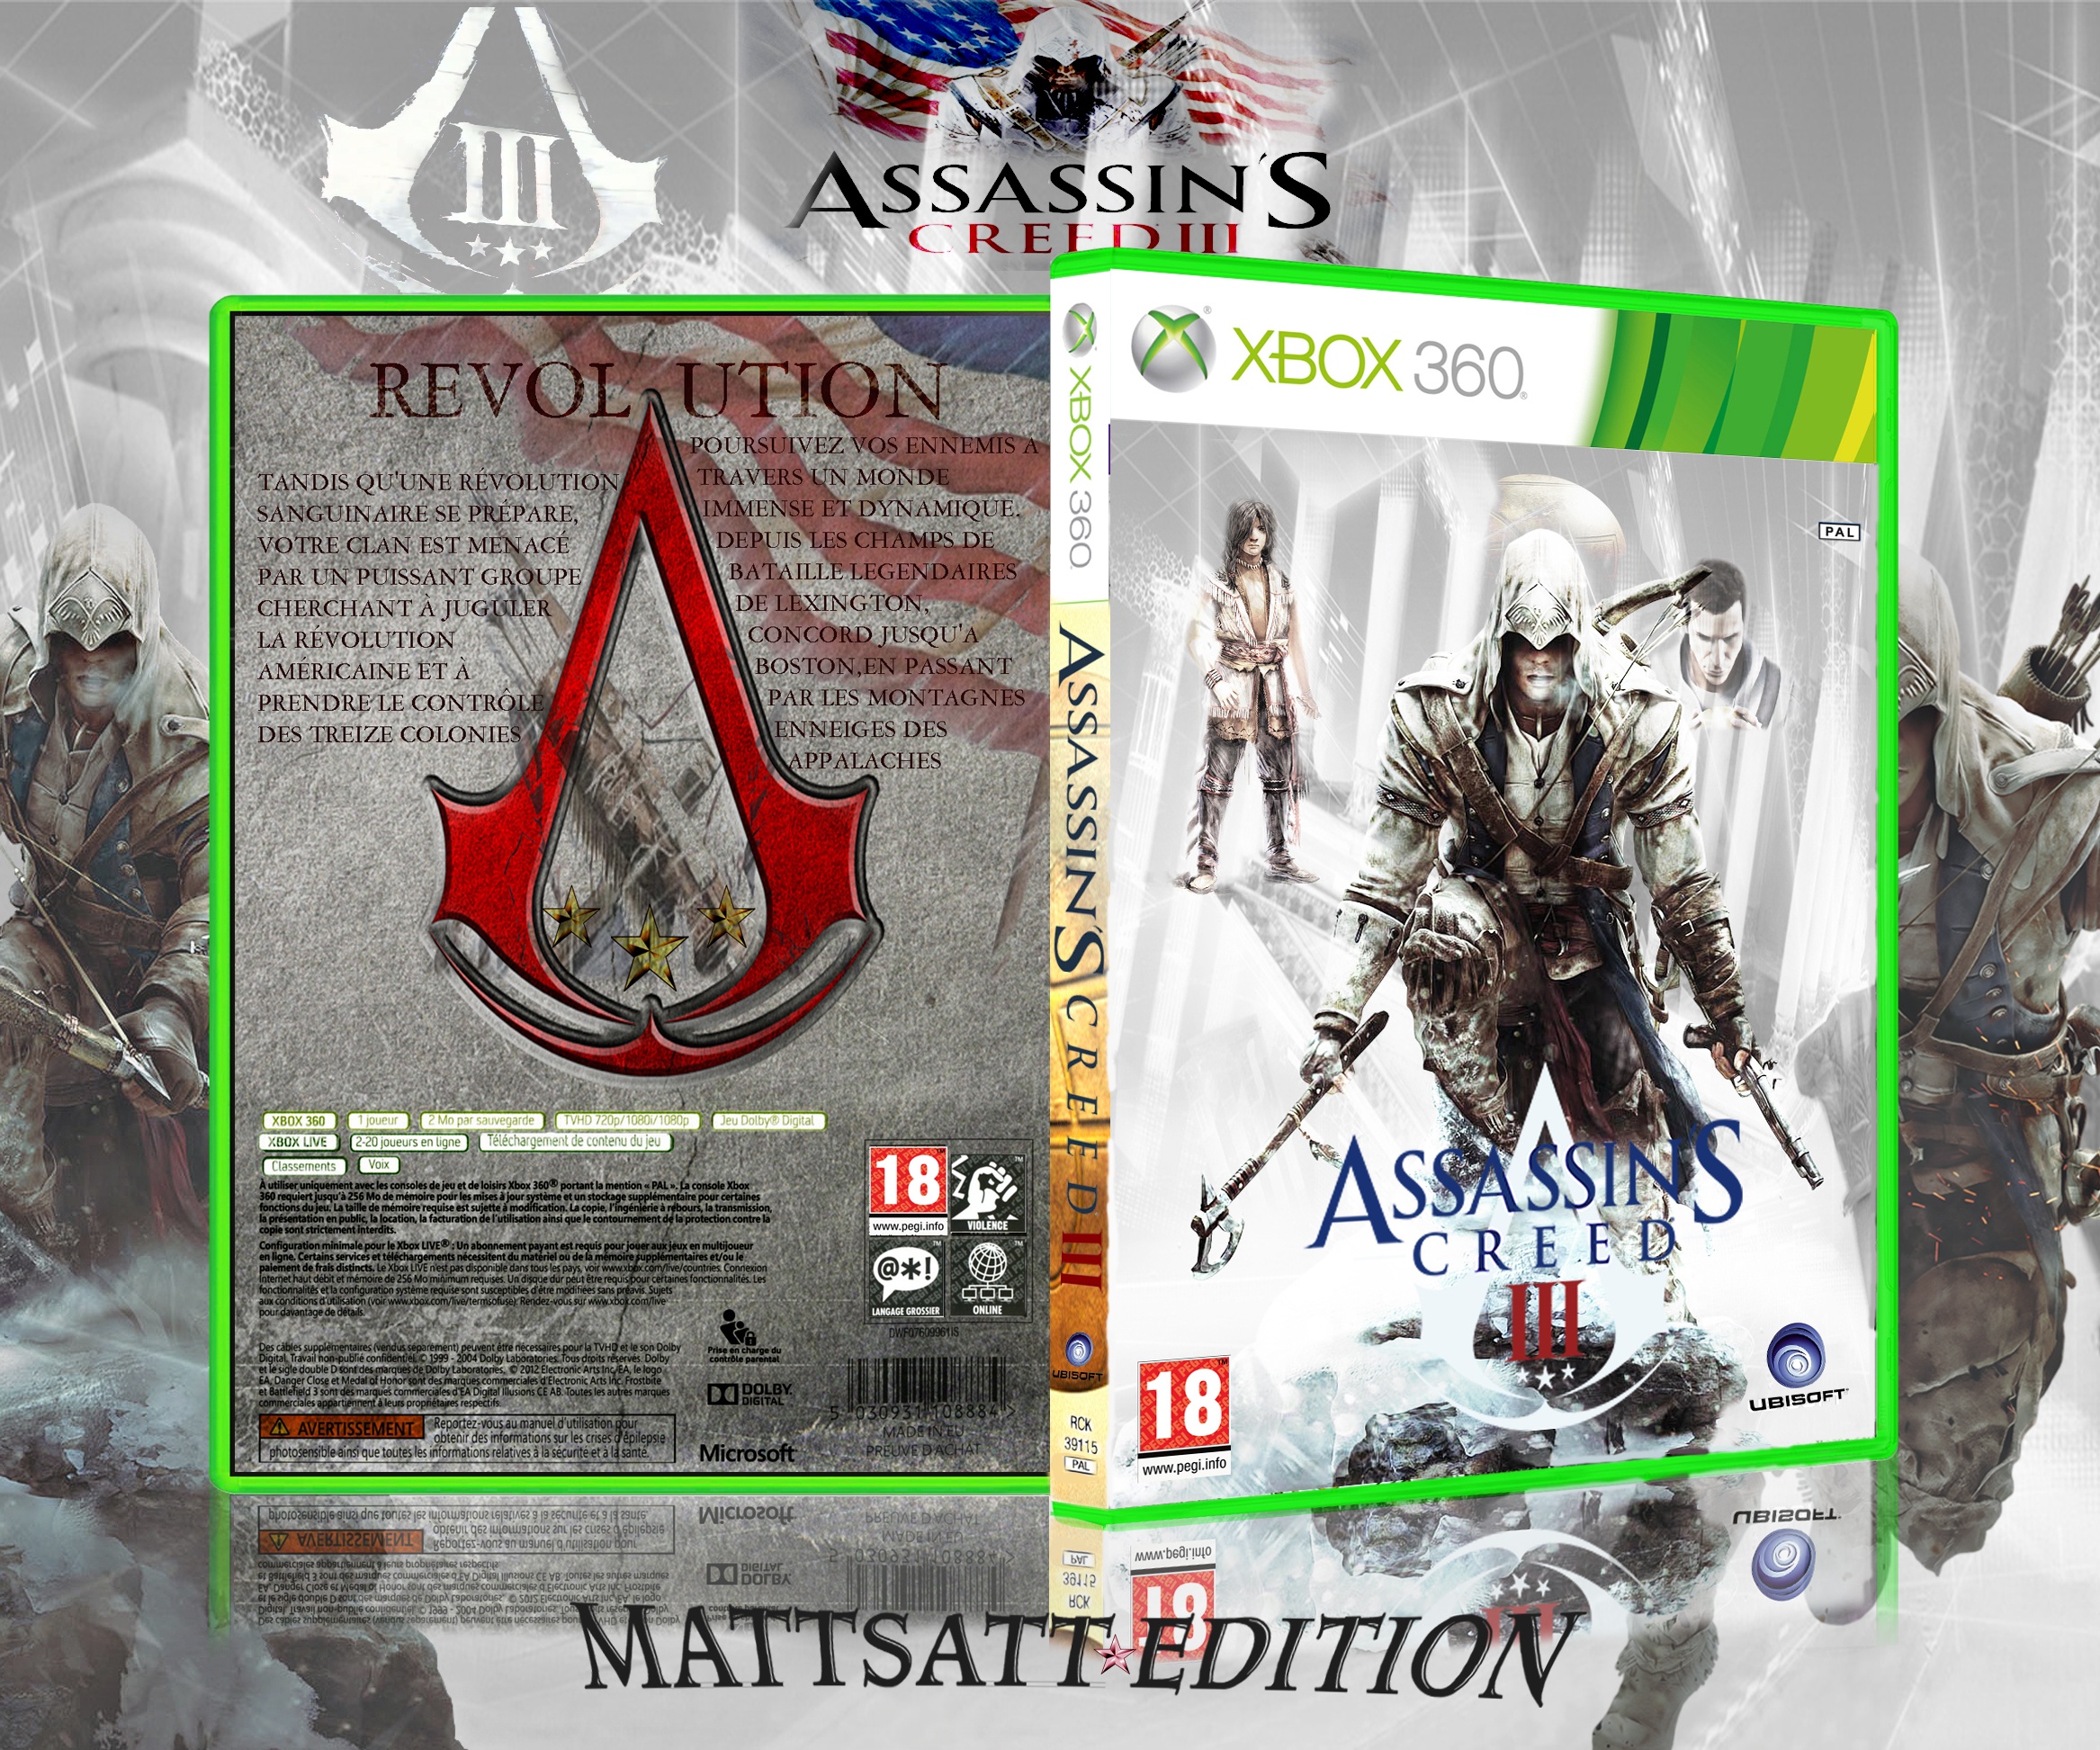 Assassin's Creed 3 box cover